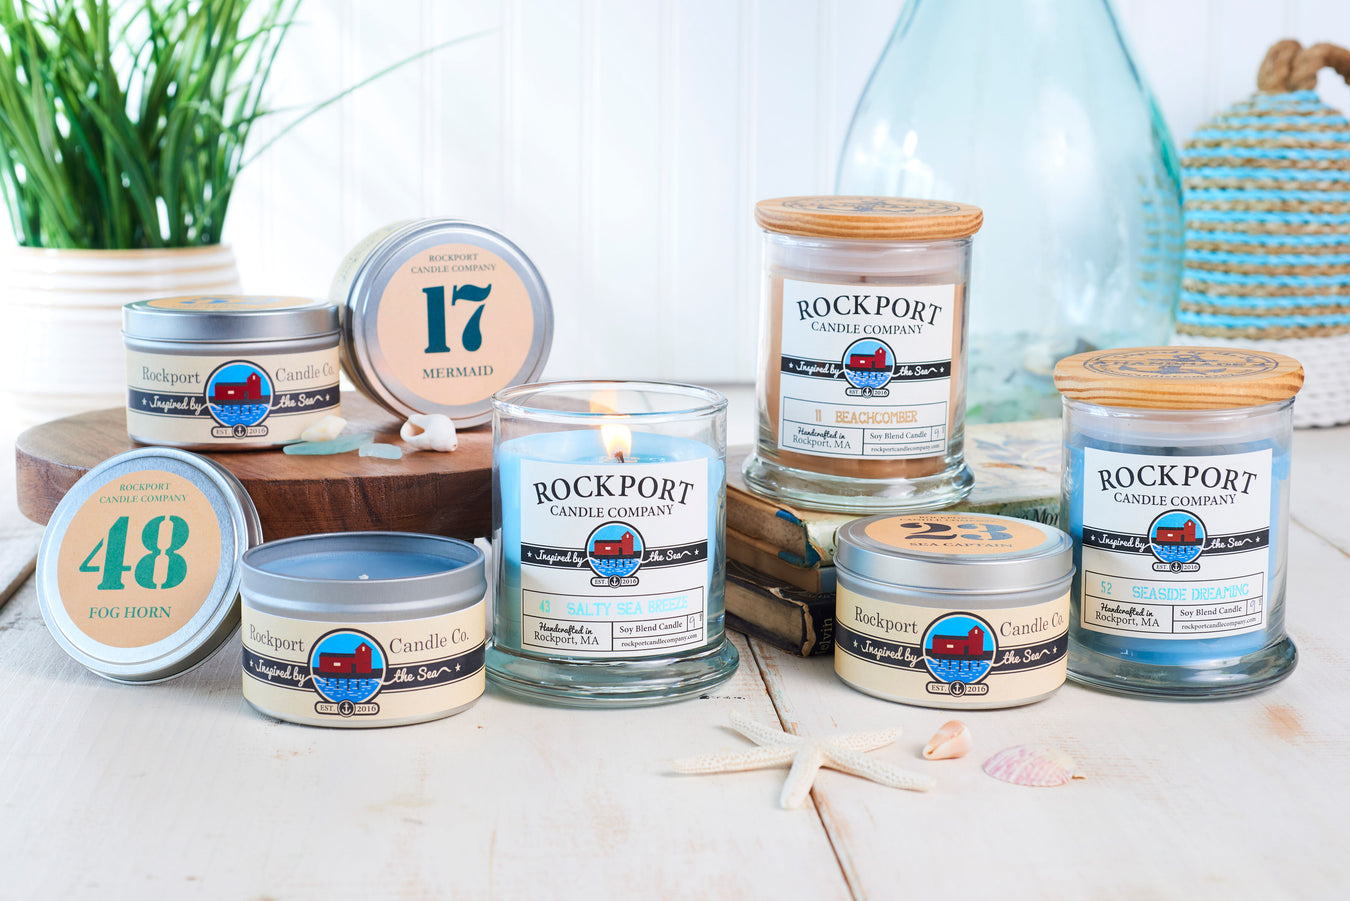 Best Selling Coastal Candles by Rockport Candle Company